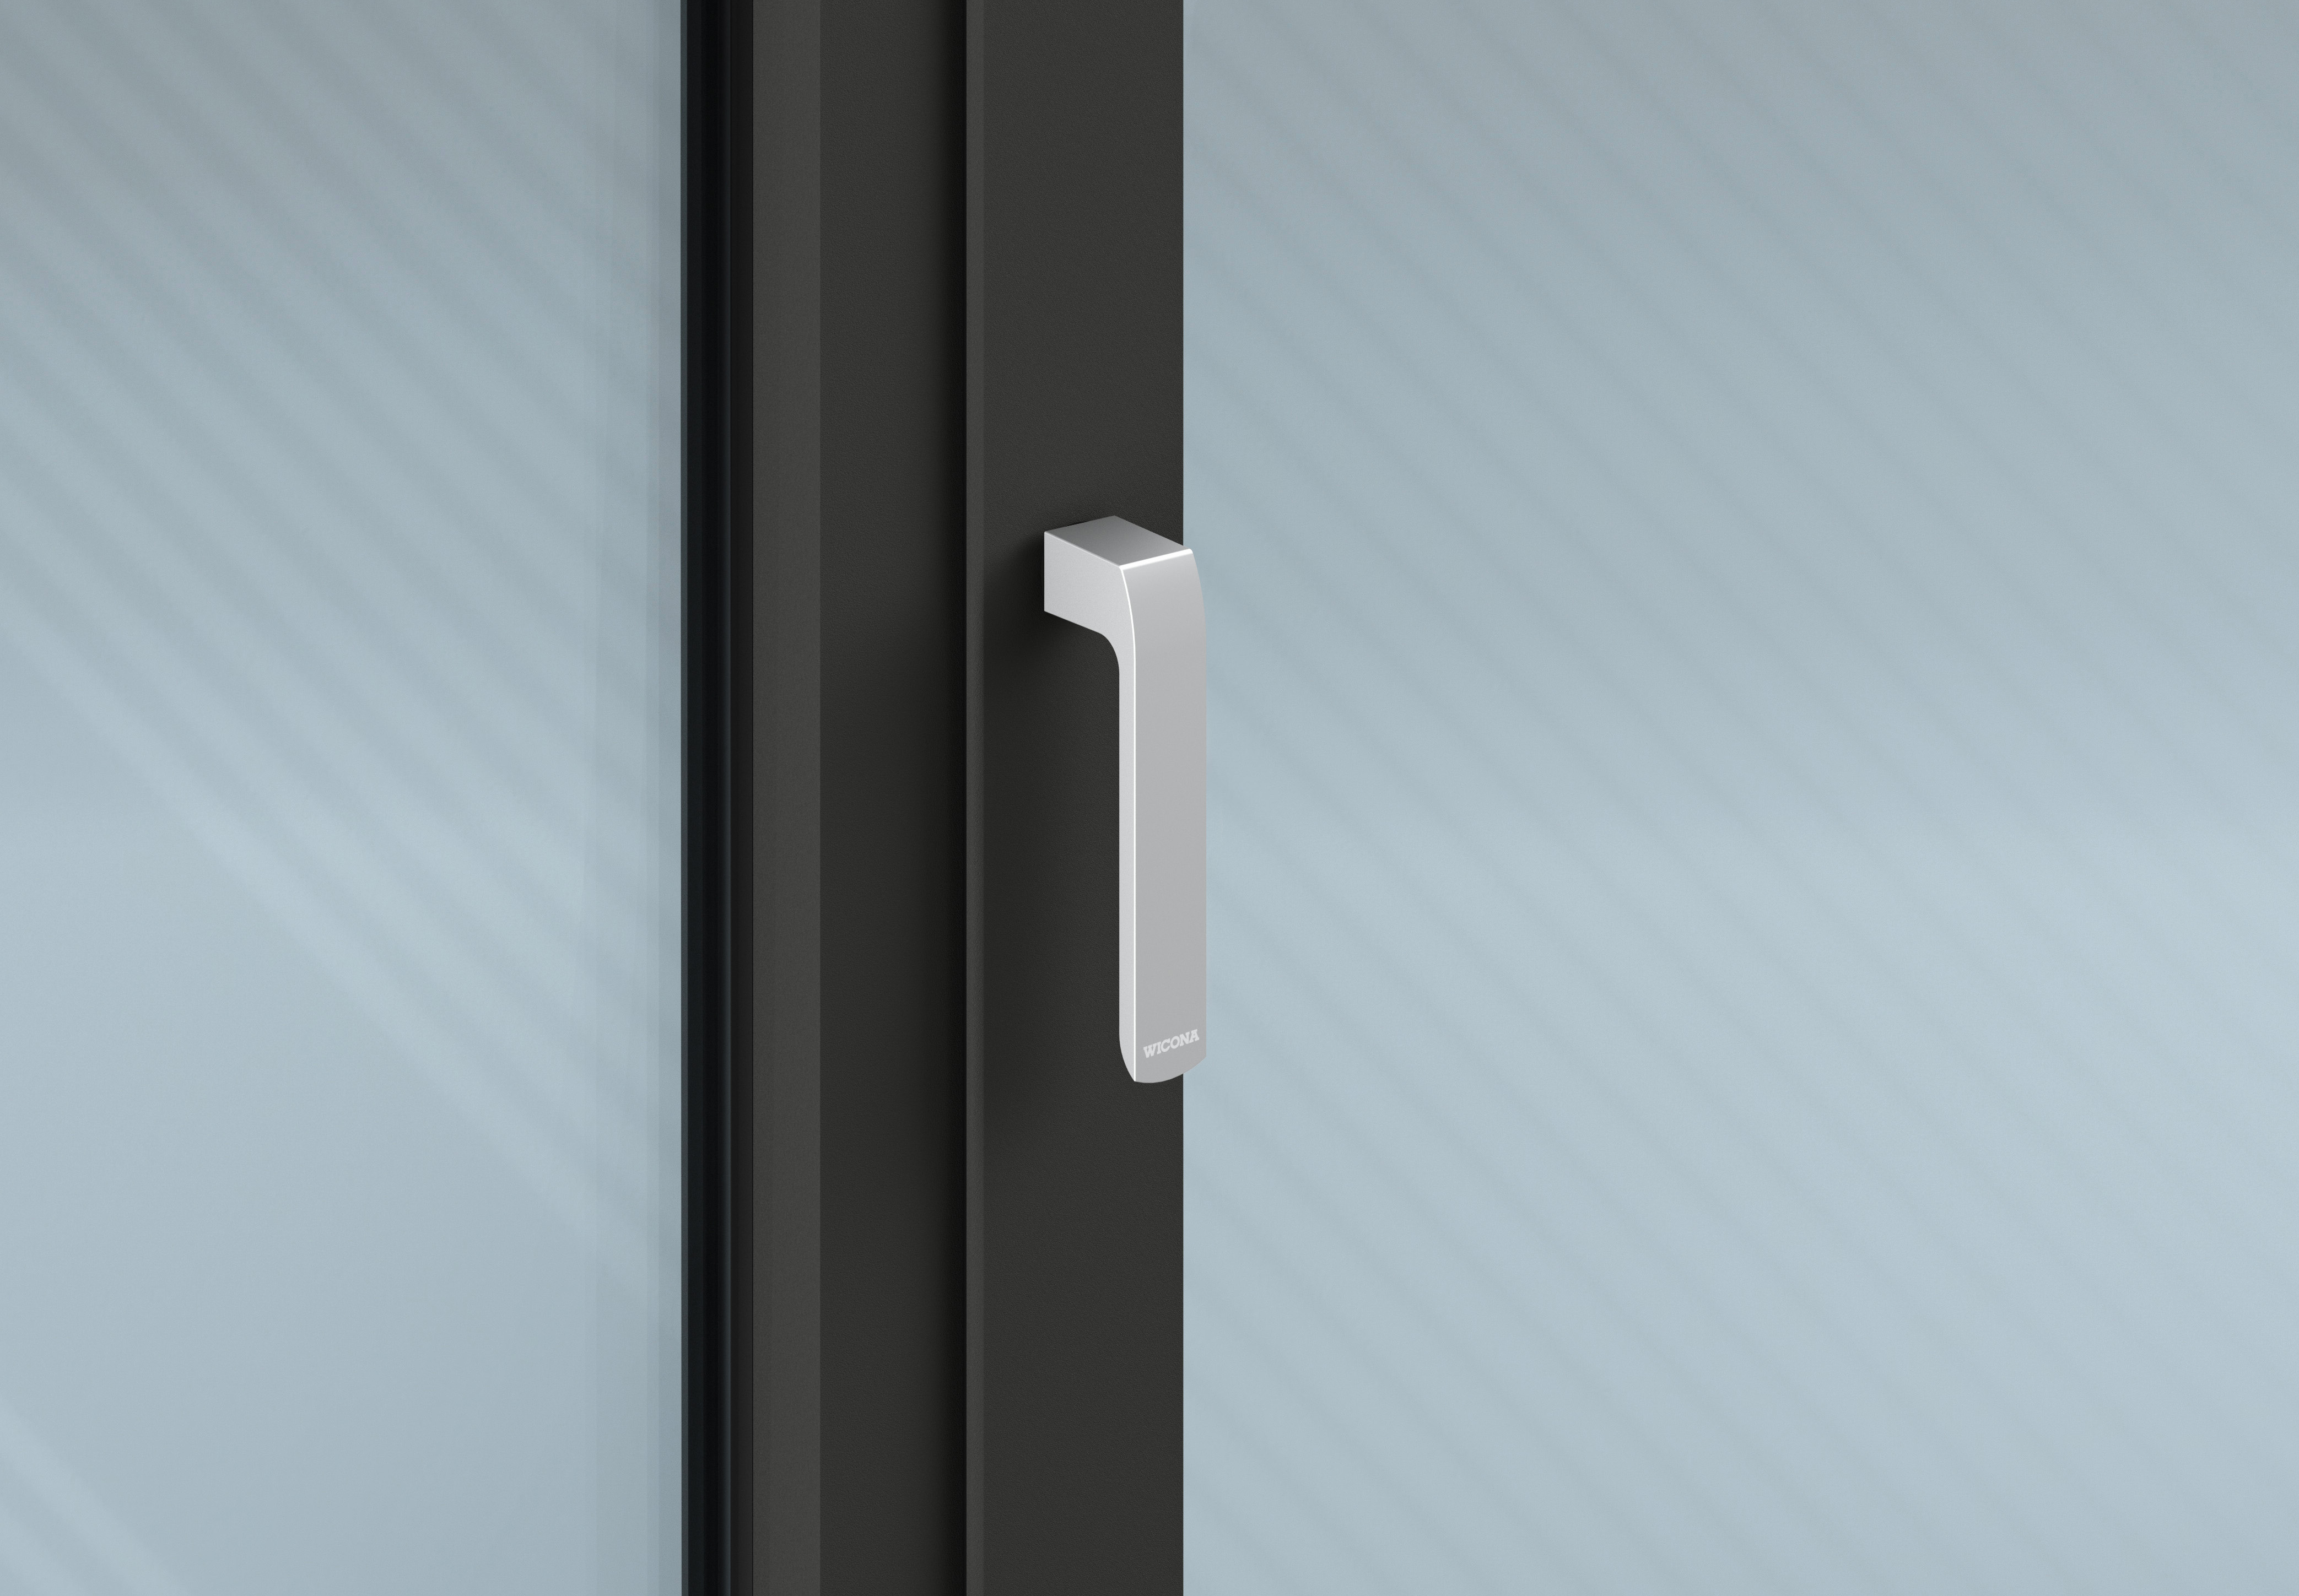 WICTOUCH Window handles